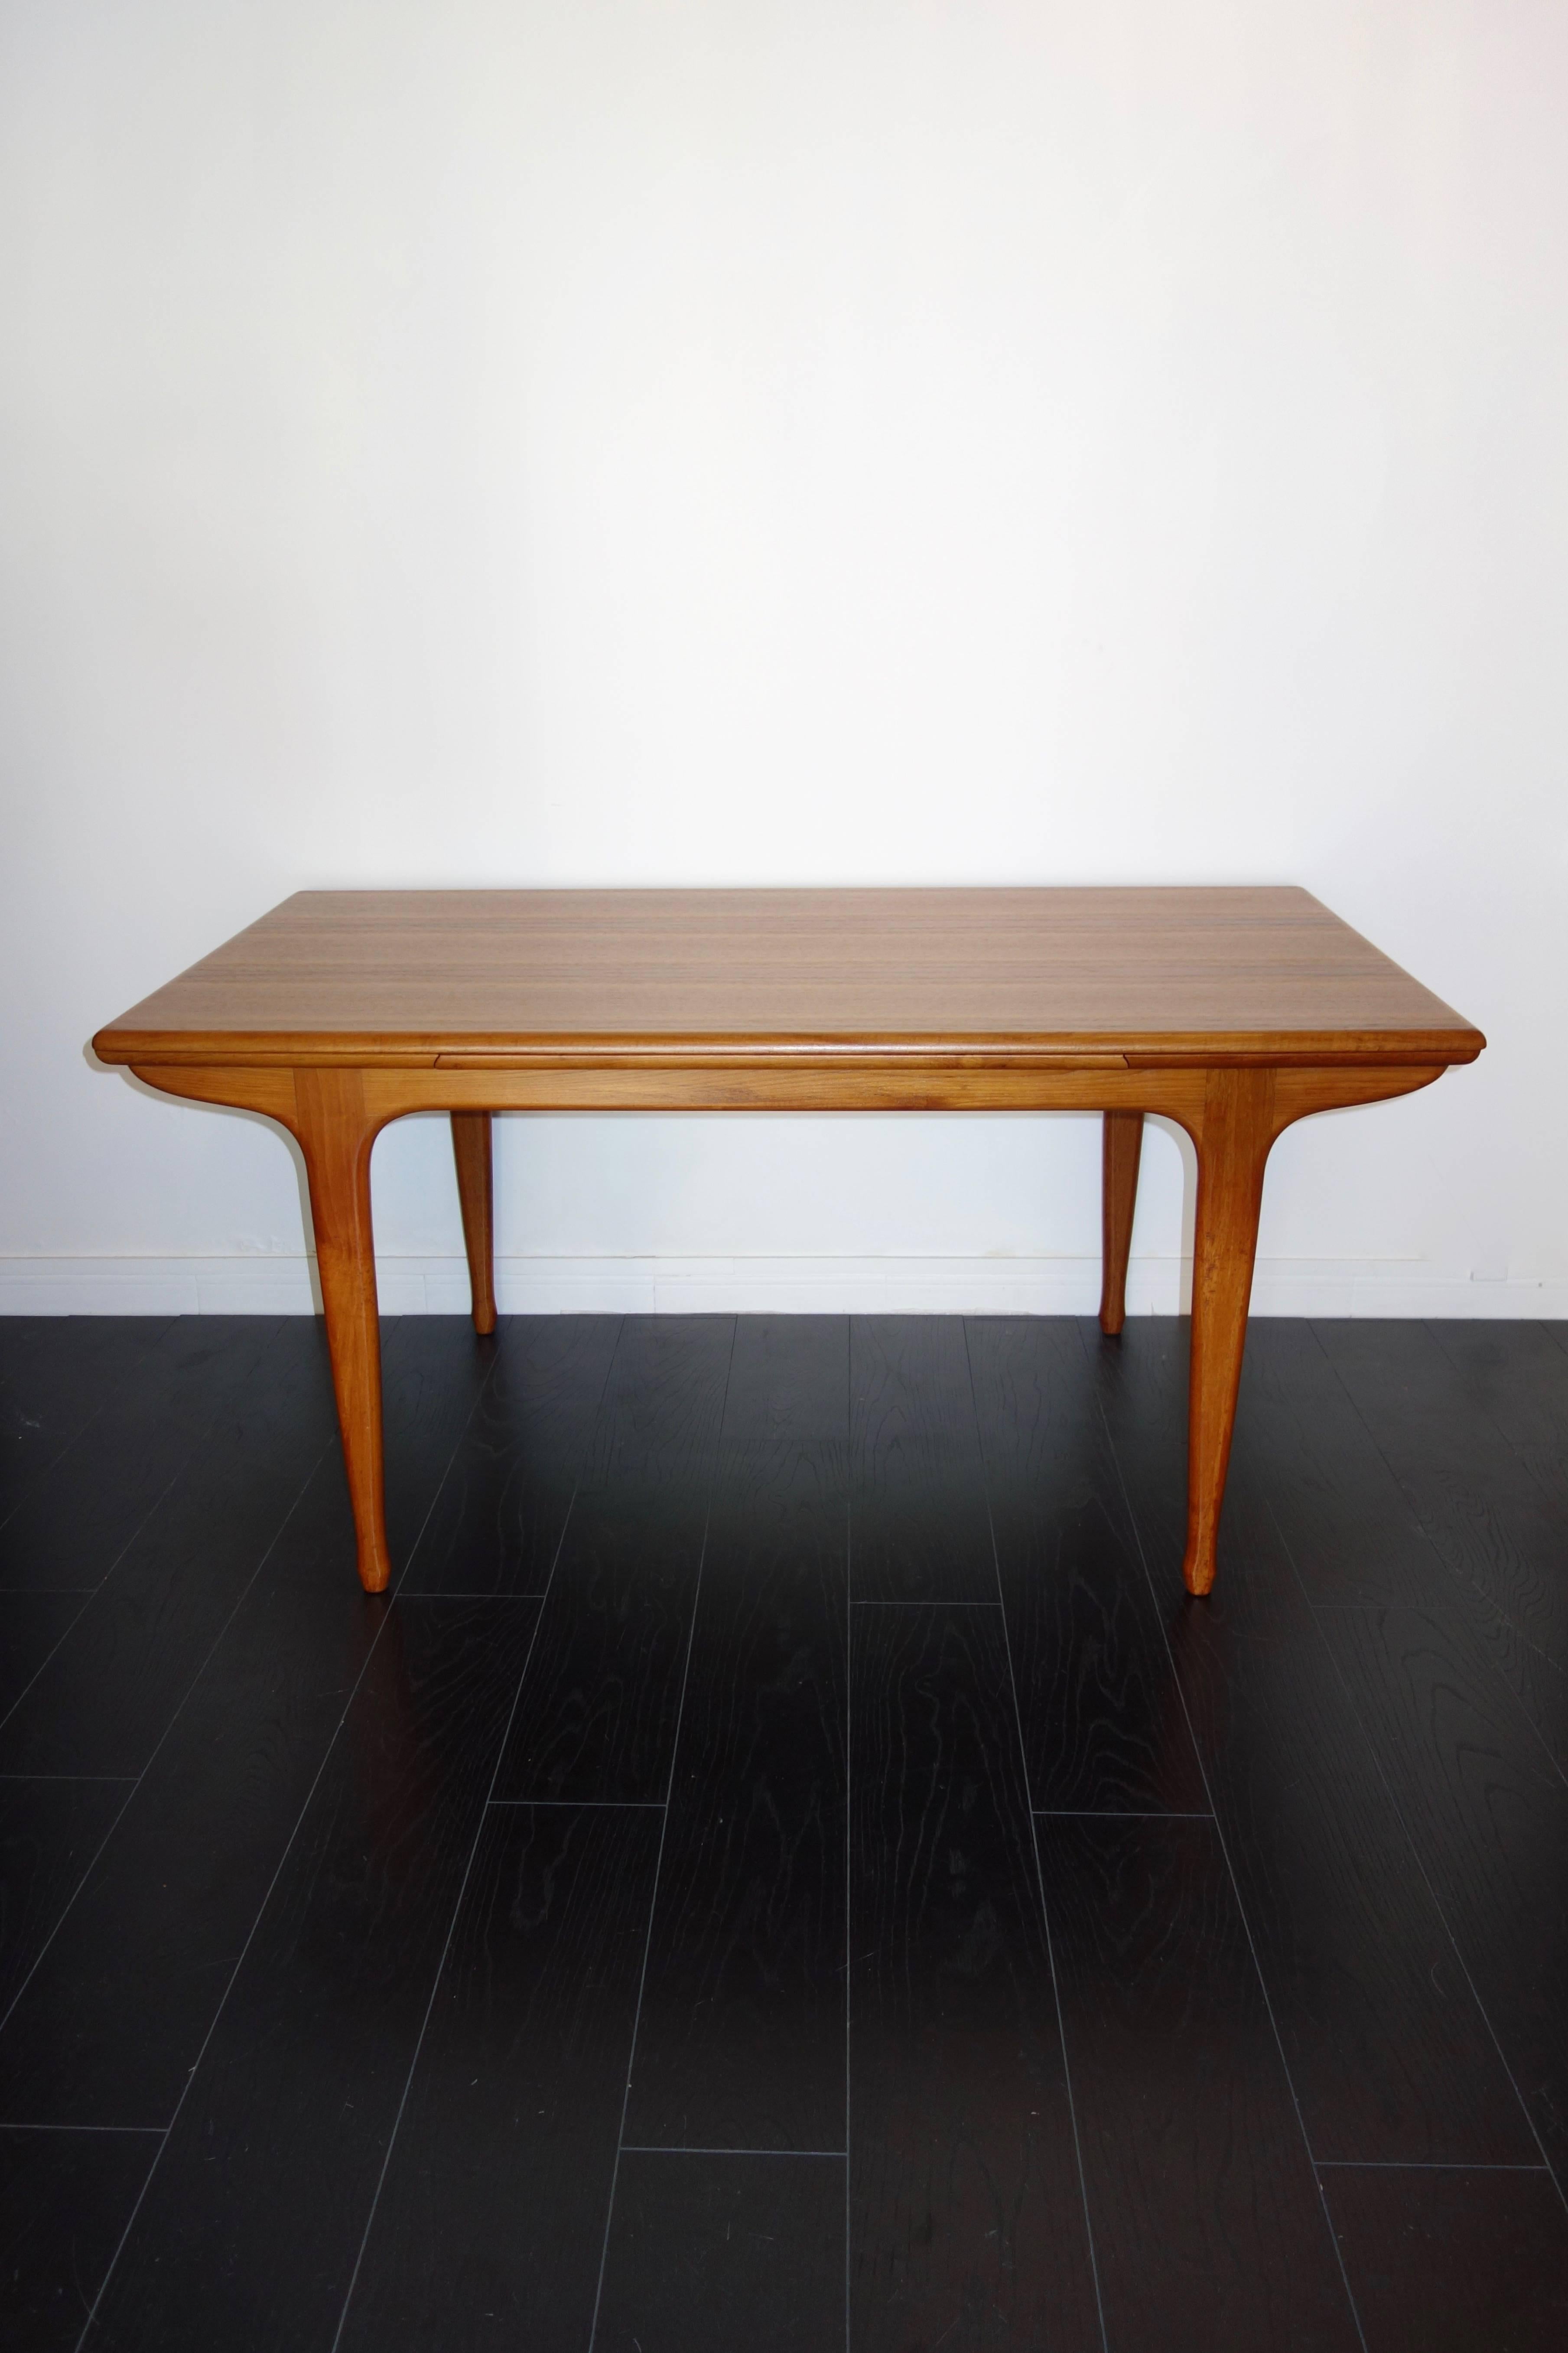 Dining table edited and manufactured by Meubles TV (Tricoire & Vecchione) in Paris in the 1960s. Scandinavian line, in teak, rounded edges, tapered legs and sliding extensions at the ends. Capacity from six to ten people. Beautiful quality of